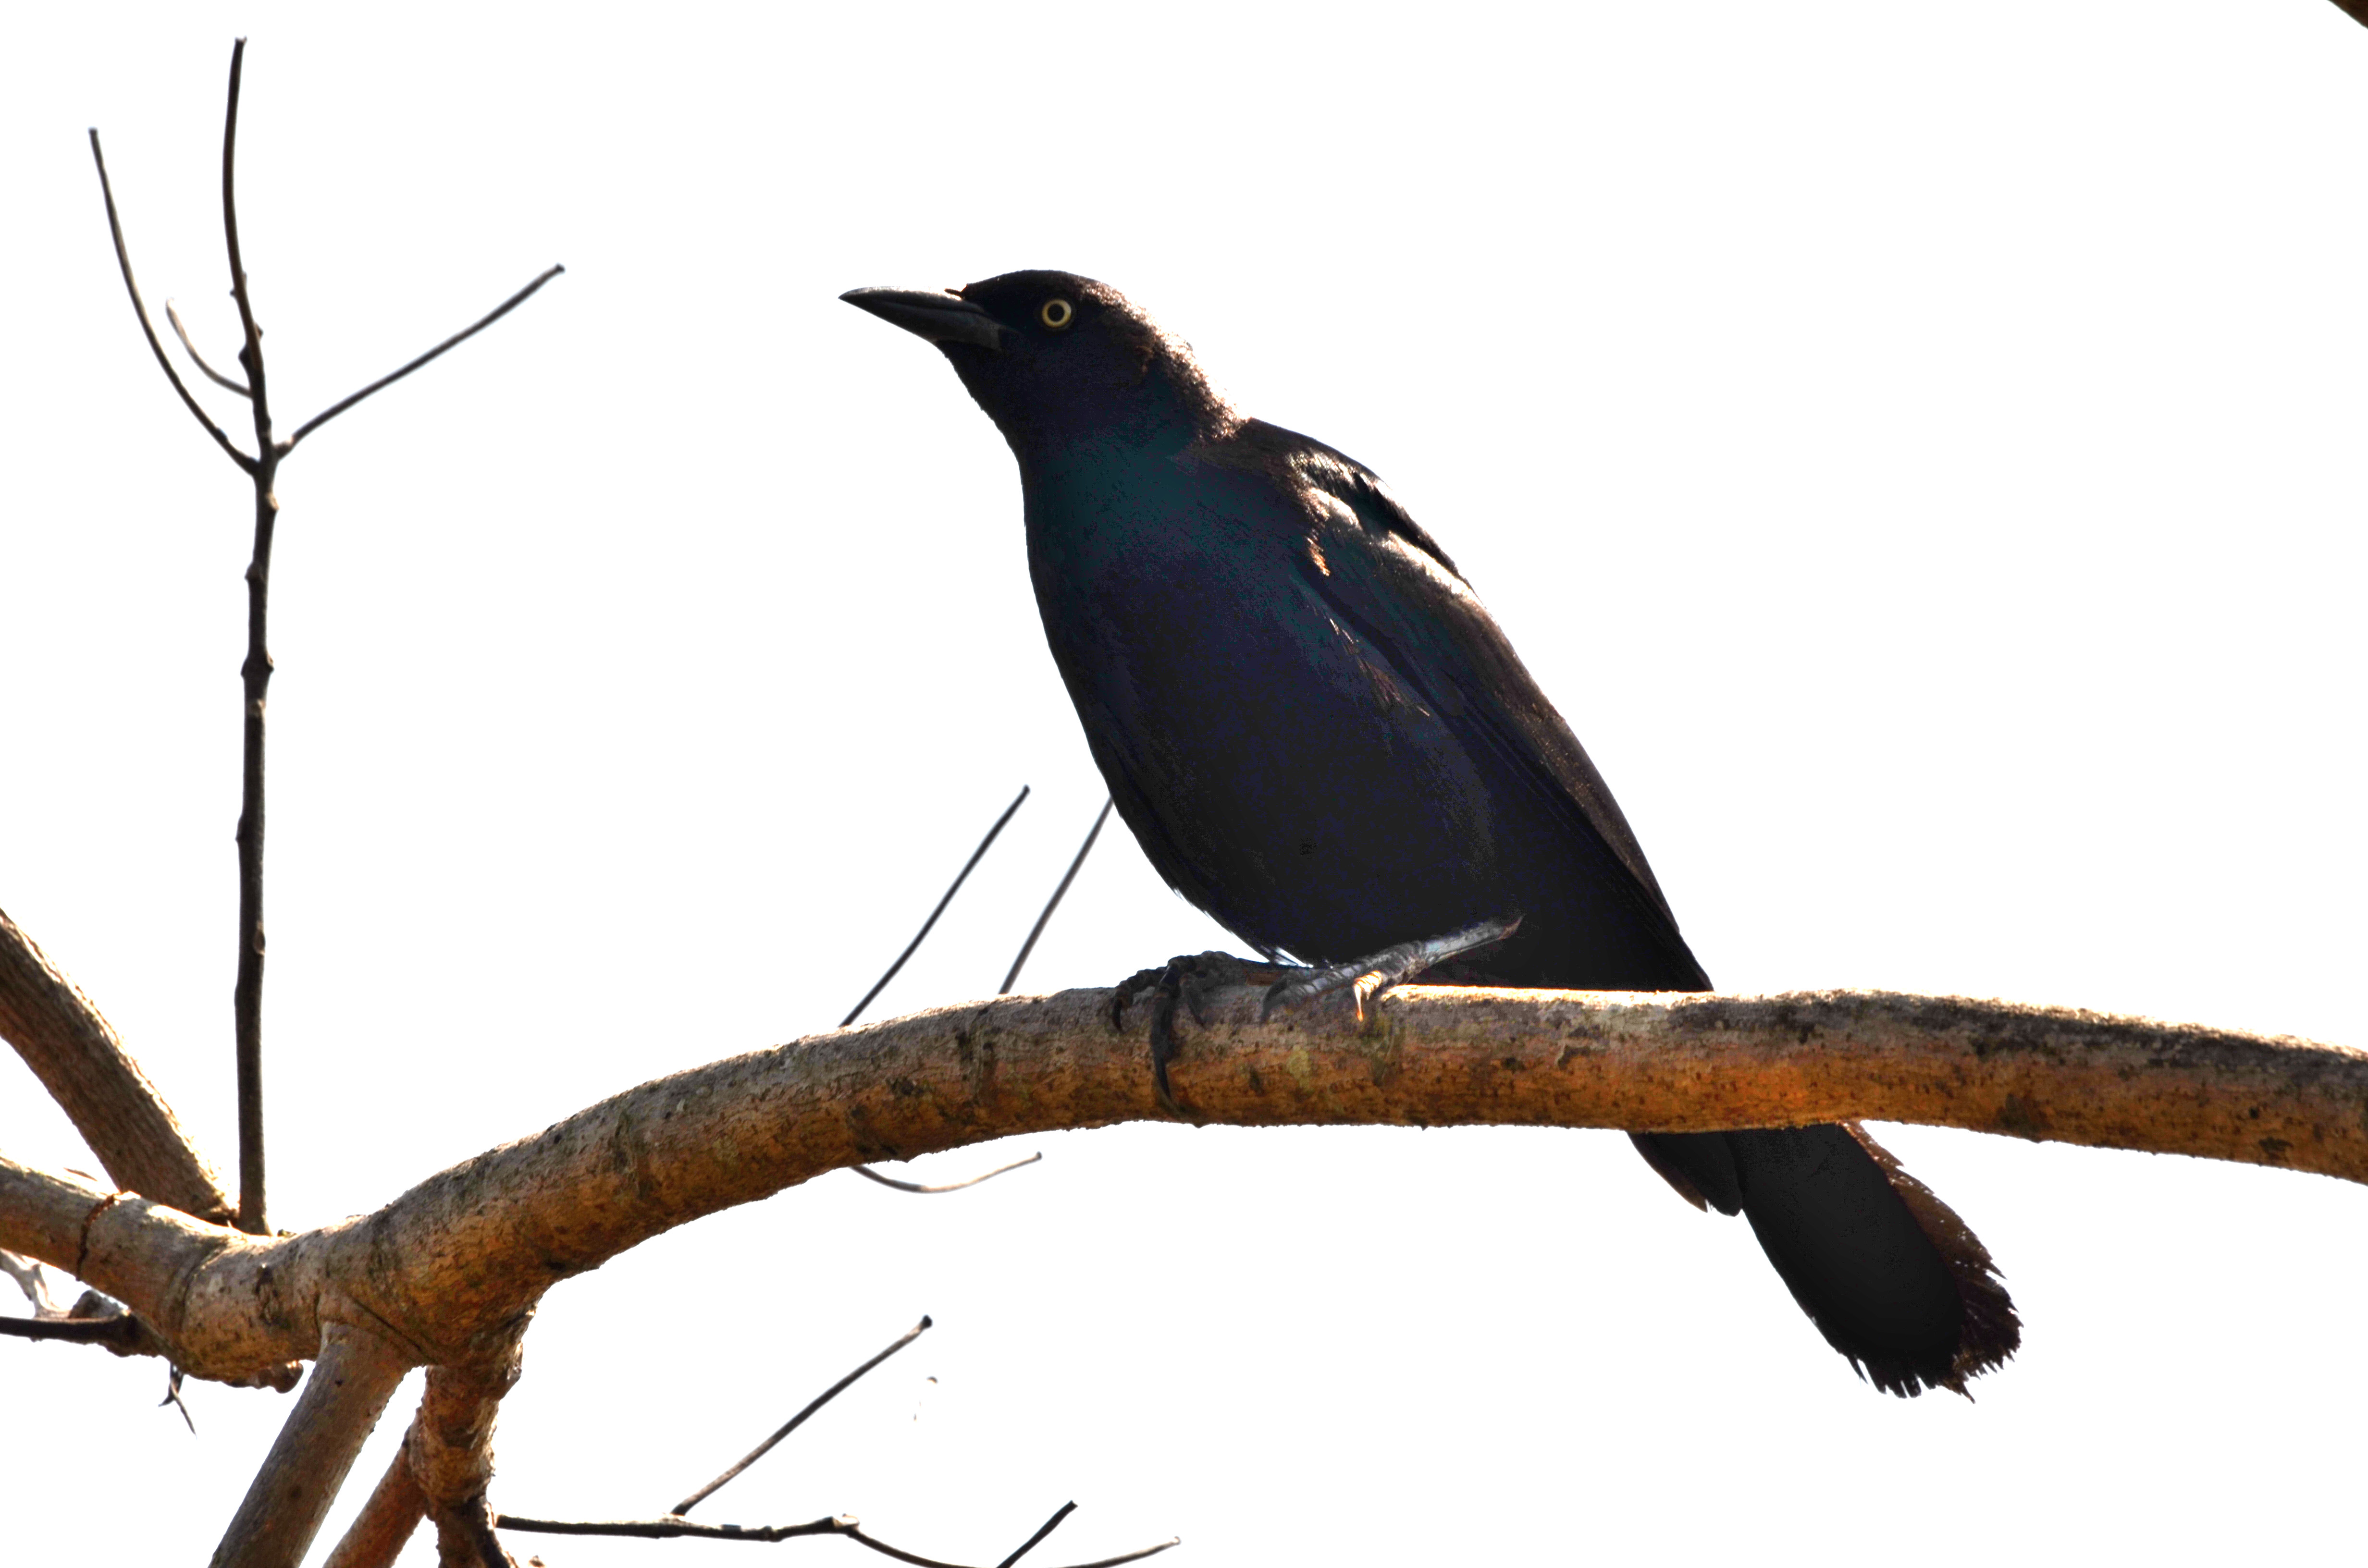 Click picture to see more  Greater Antillean Grackles.